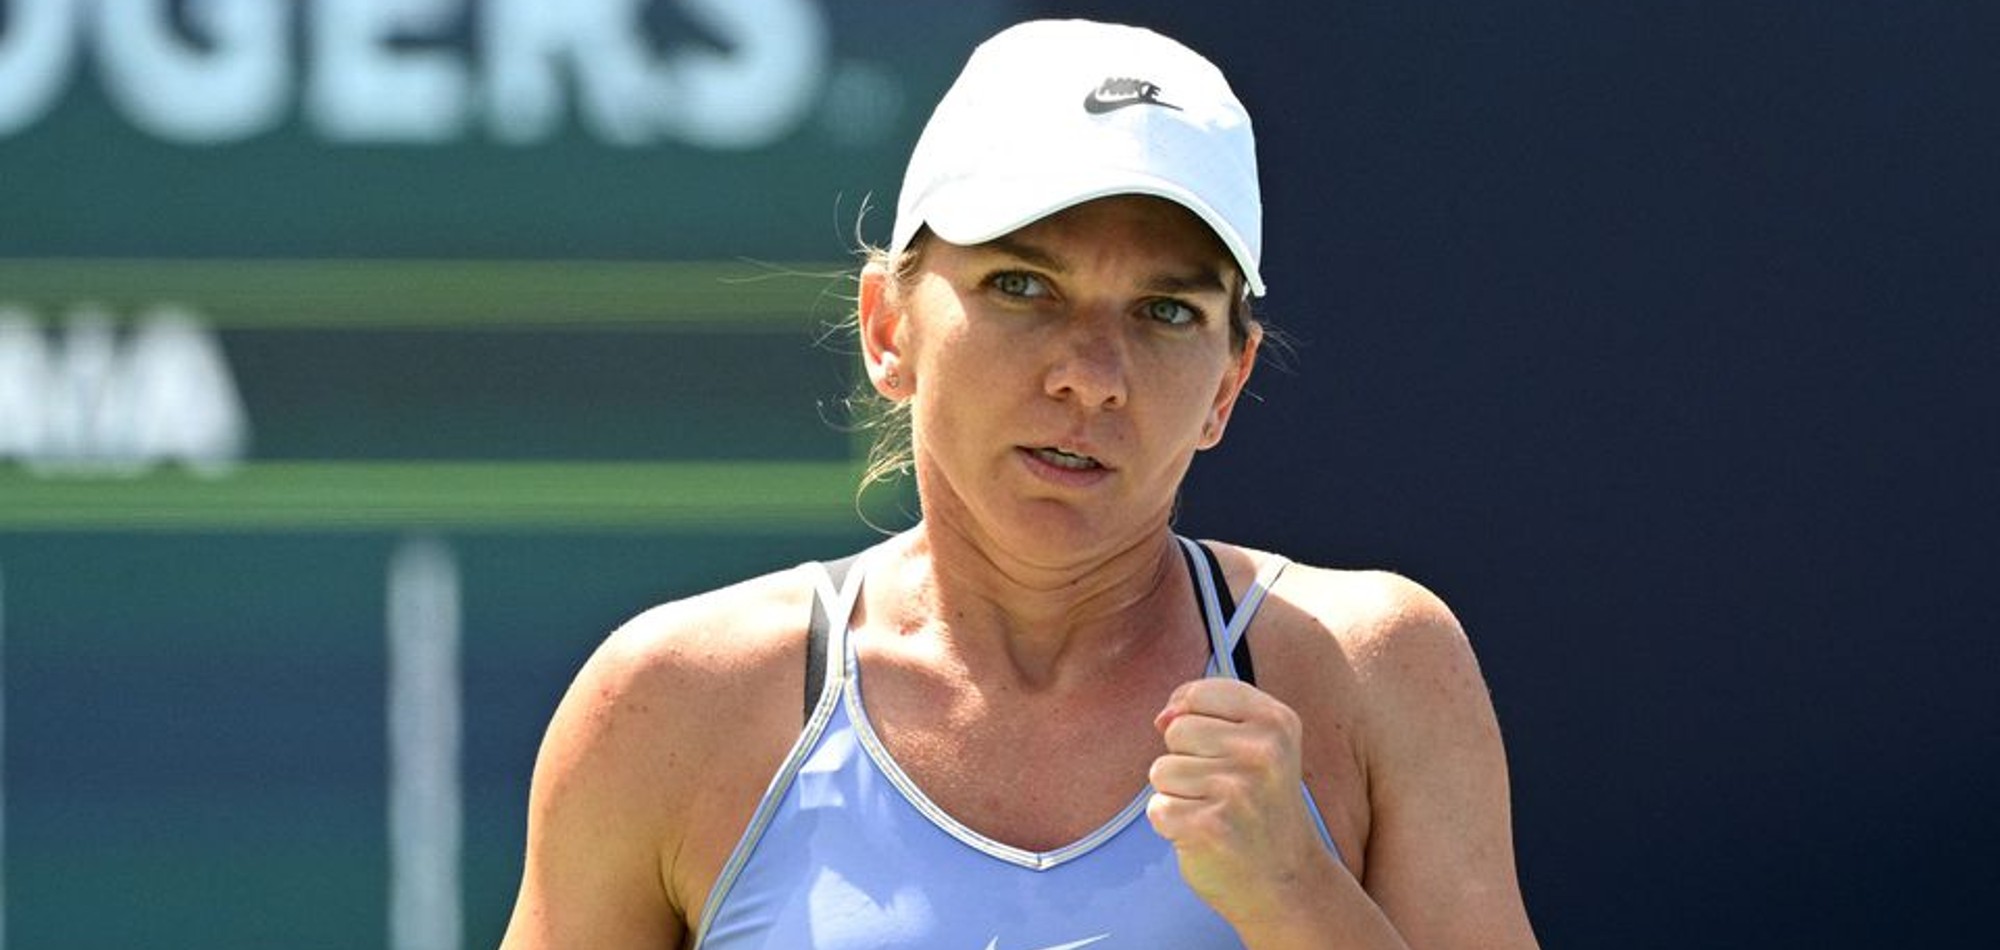 Halep beats Haddad Maia for third Canadian Open title